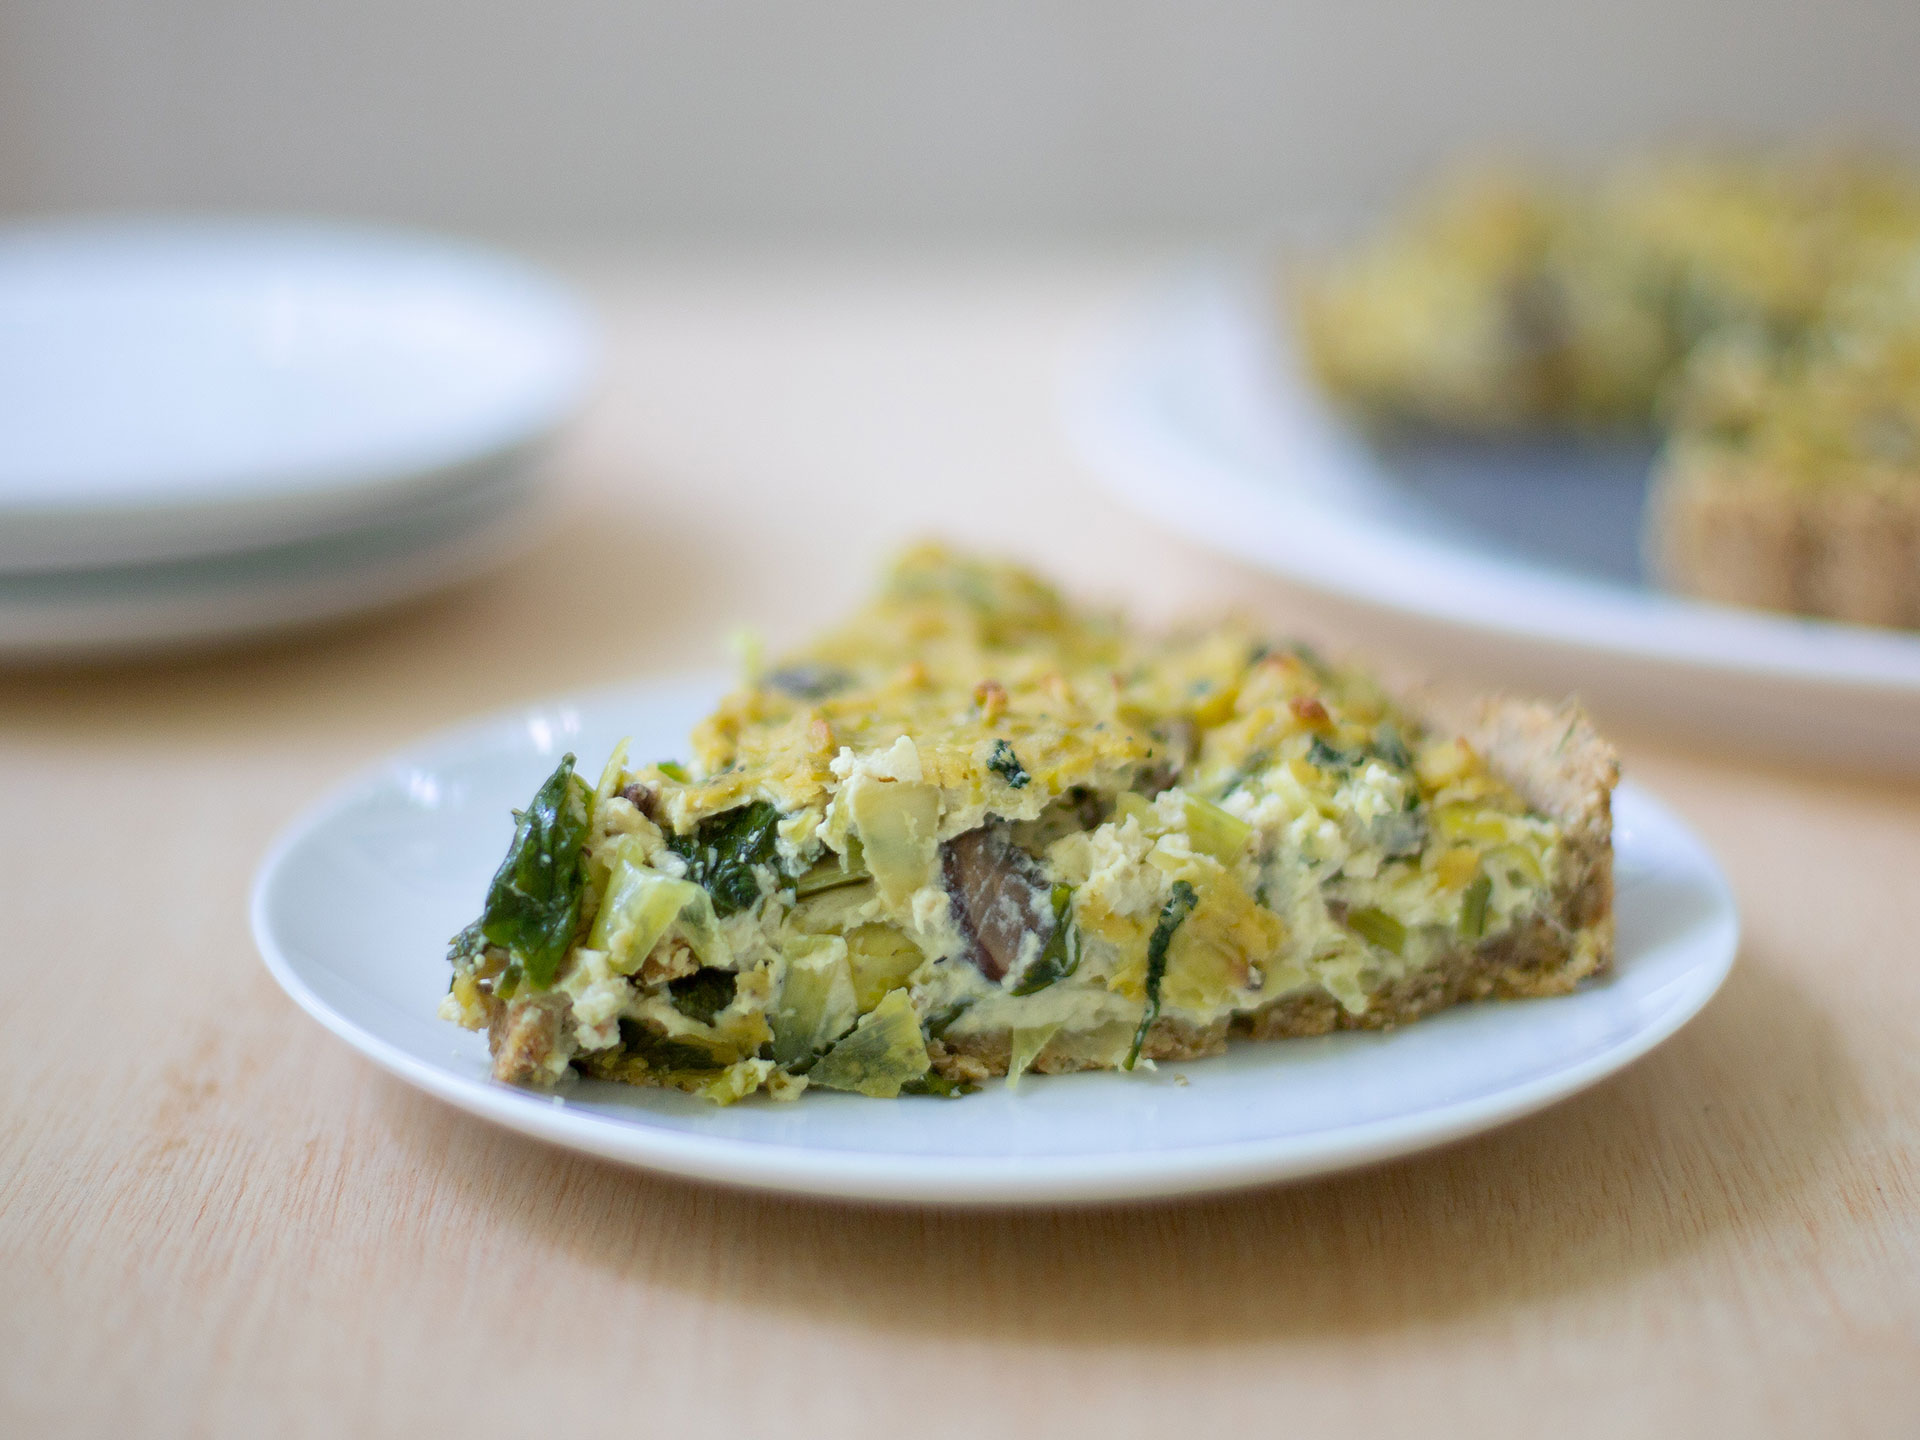 Turnip Greens Tofu Quiche with Mushroom and Olives - Shifty Crafty